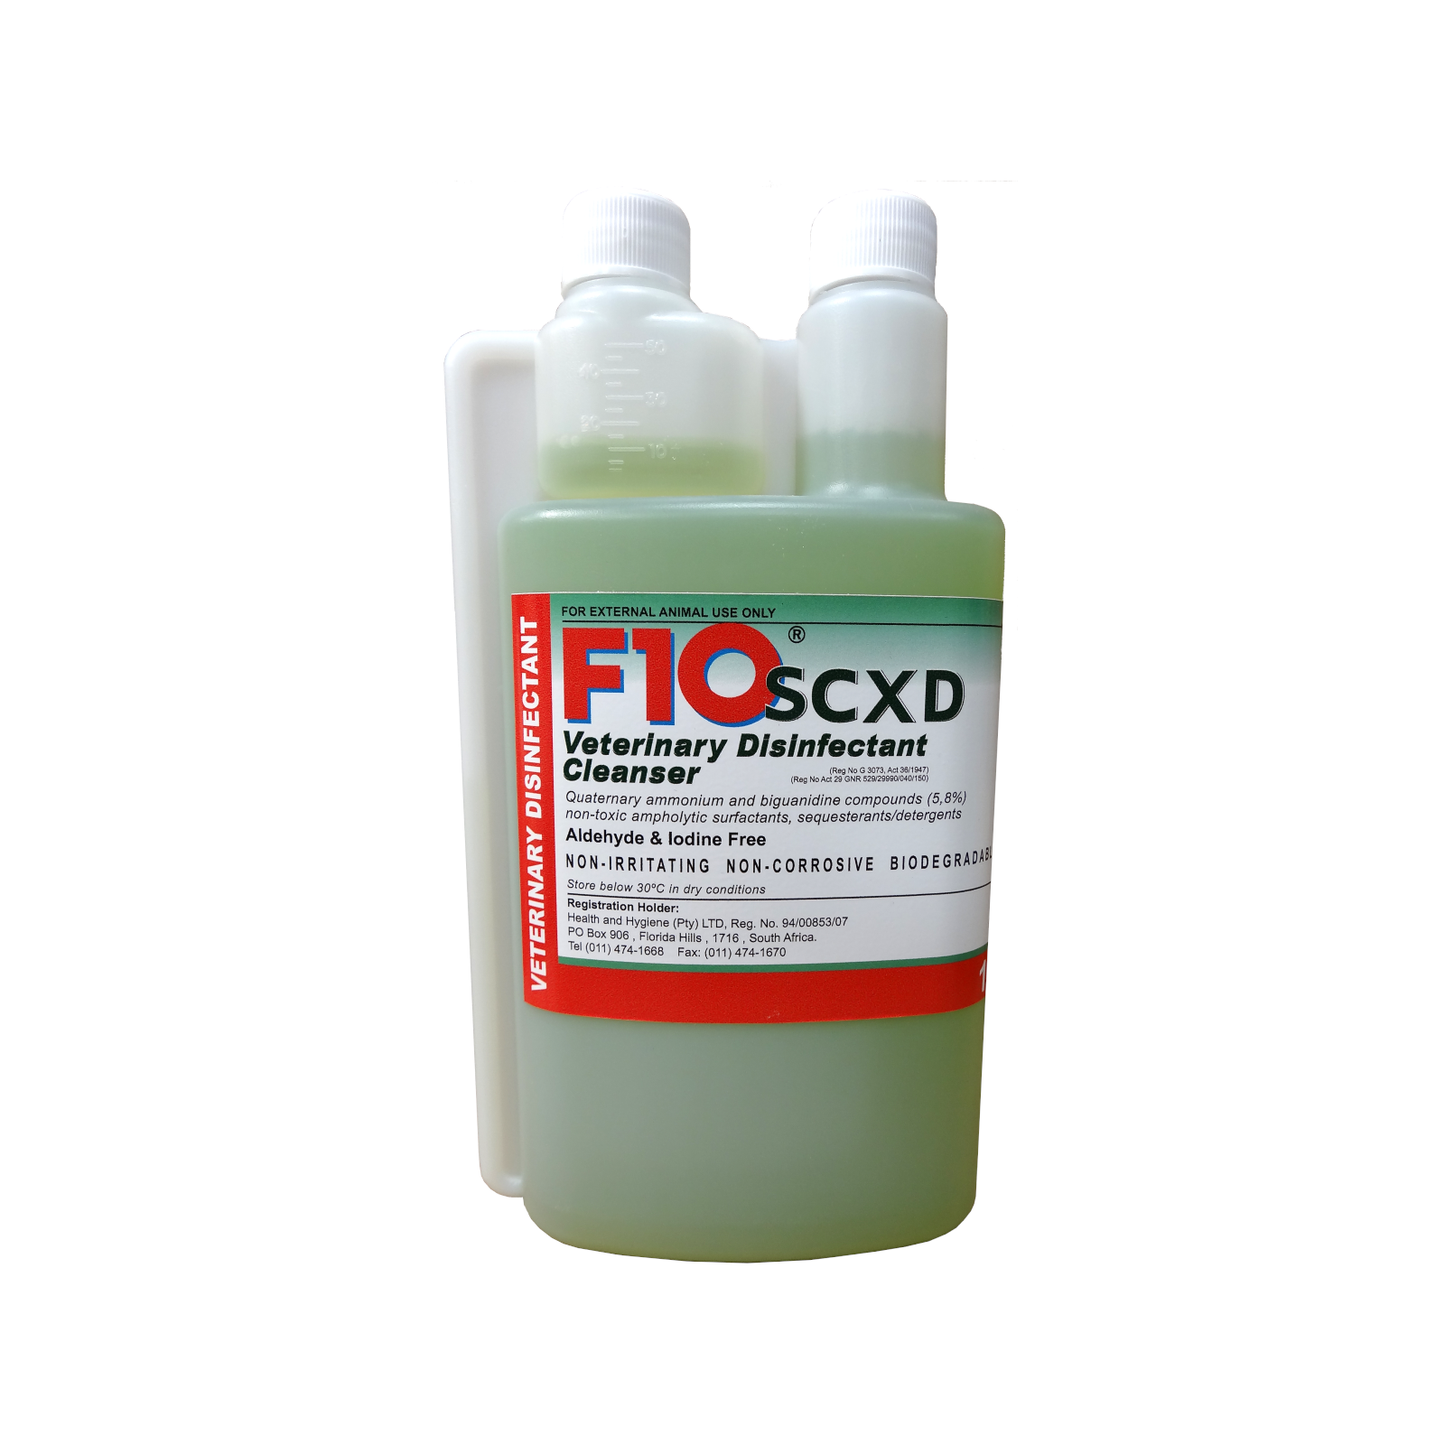 A 1 litre bottle of F10SCXD Veterinary Disinfectant Cleanser